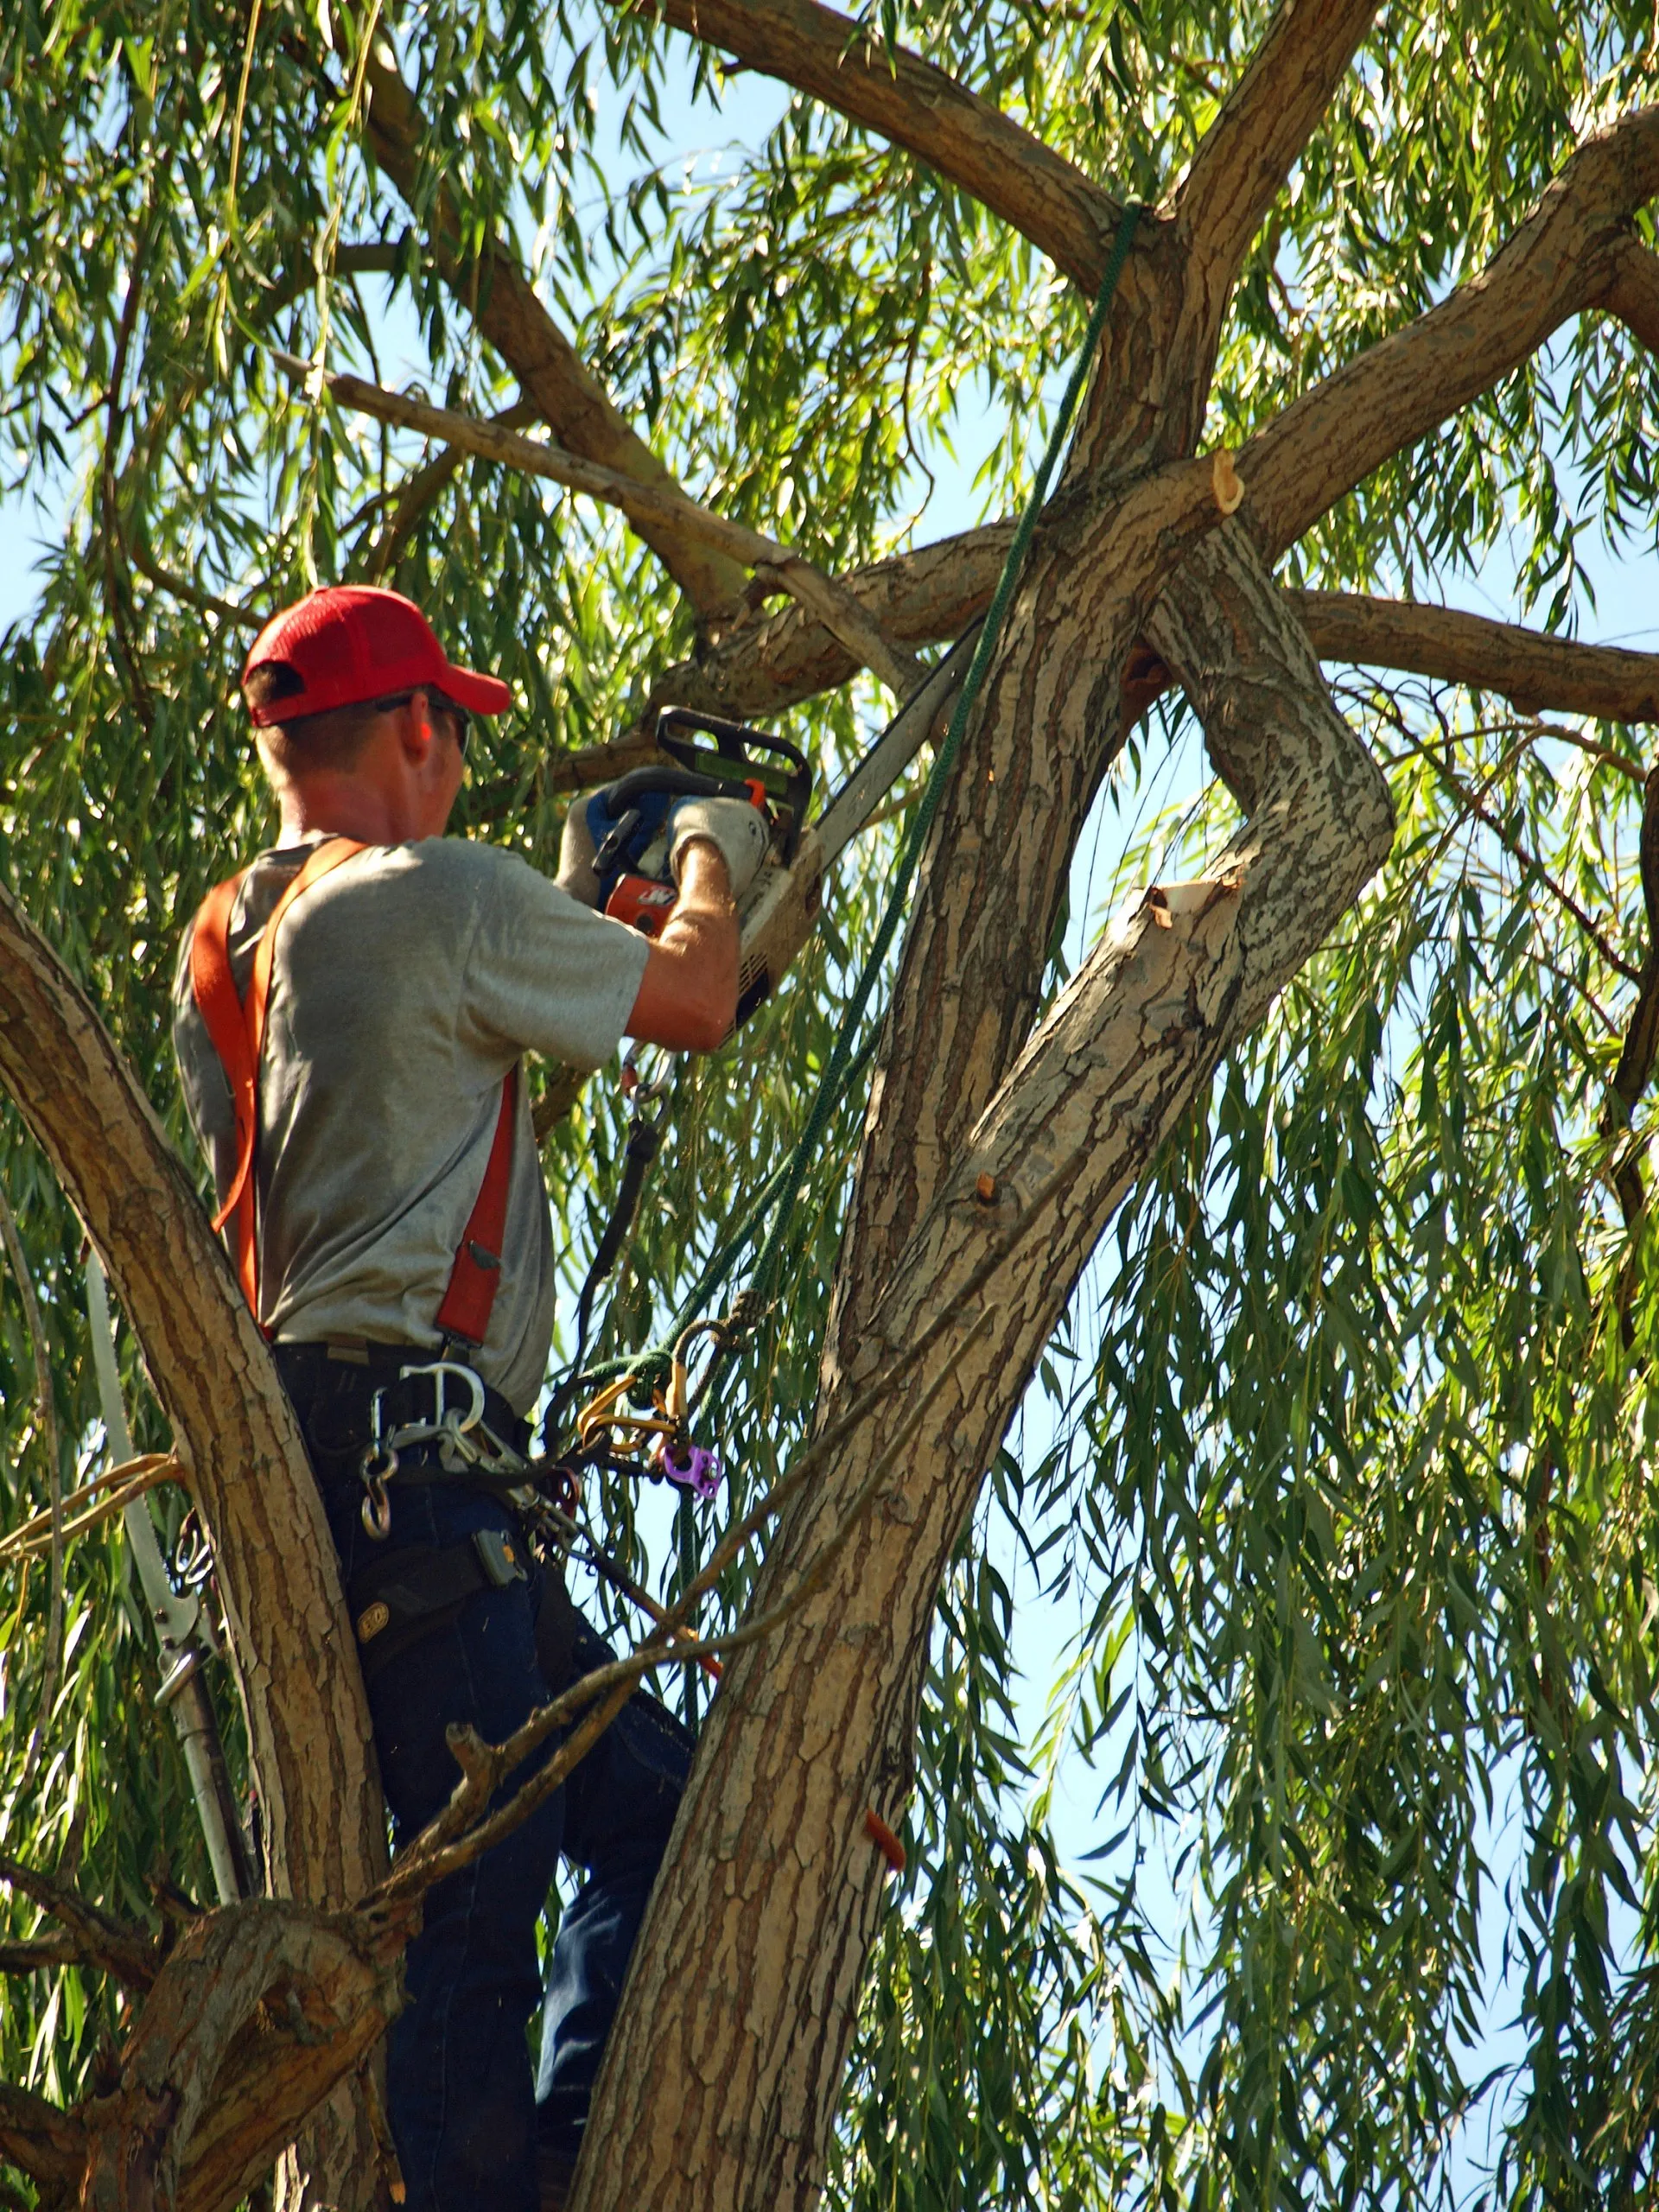 The arborist is sawing each branch of the tree with a chainsaw.